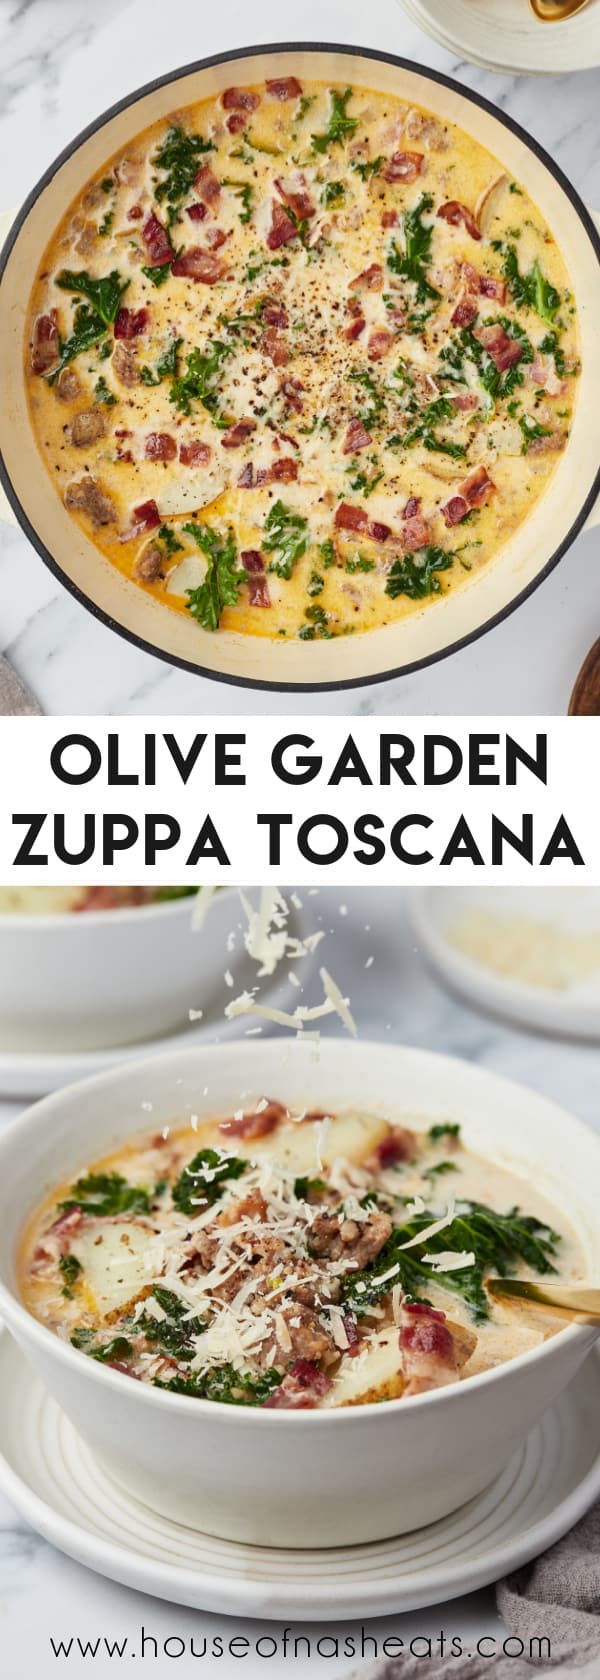 A collage of images of zuppa toscana with text overlay.